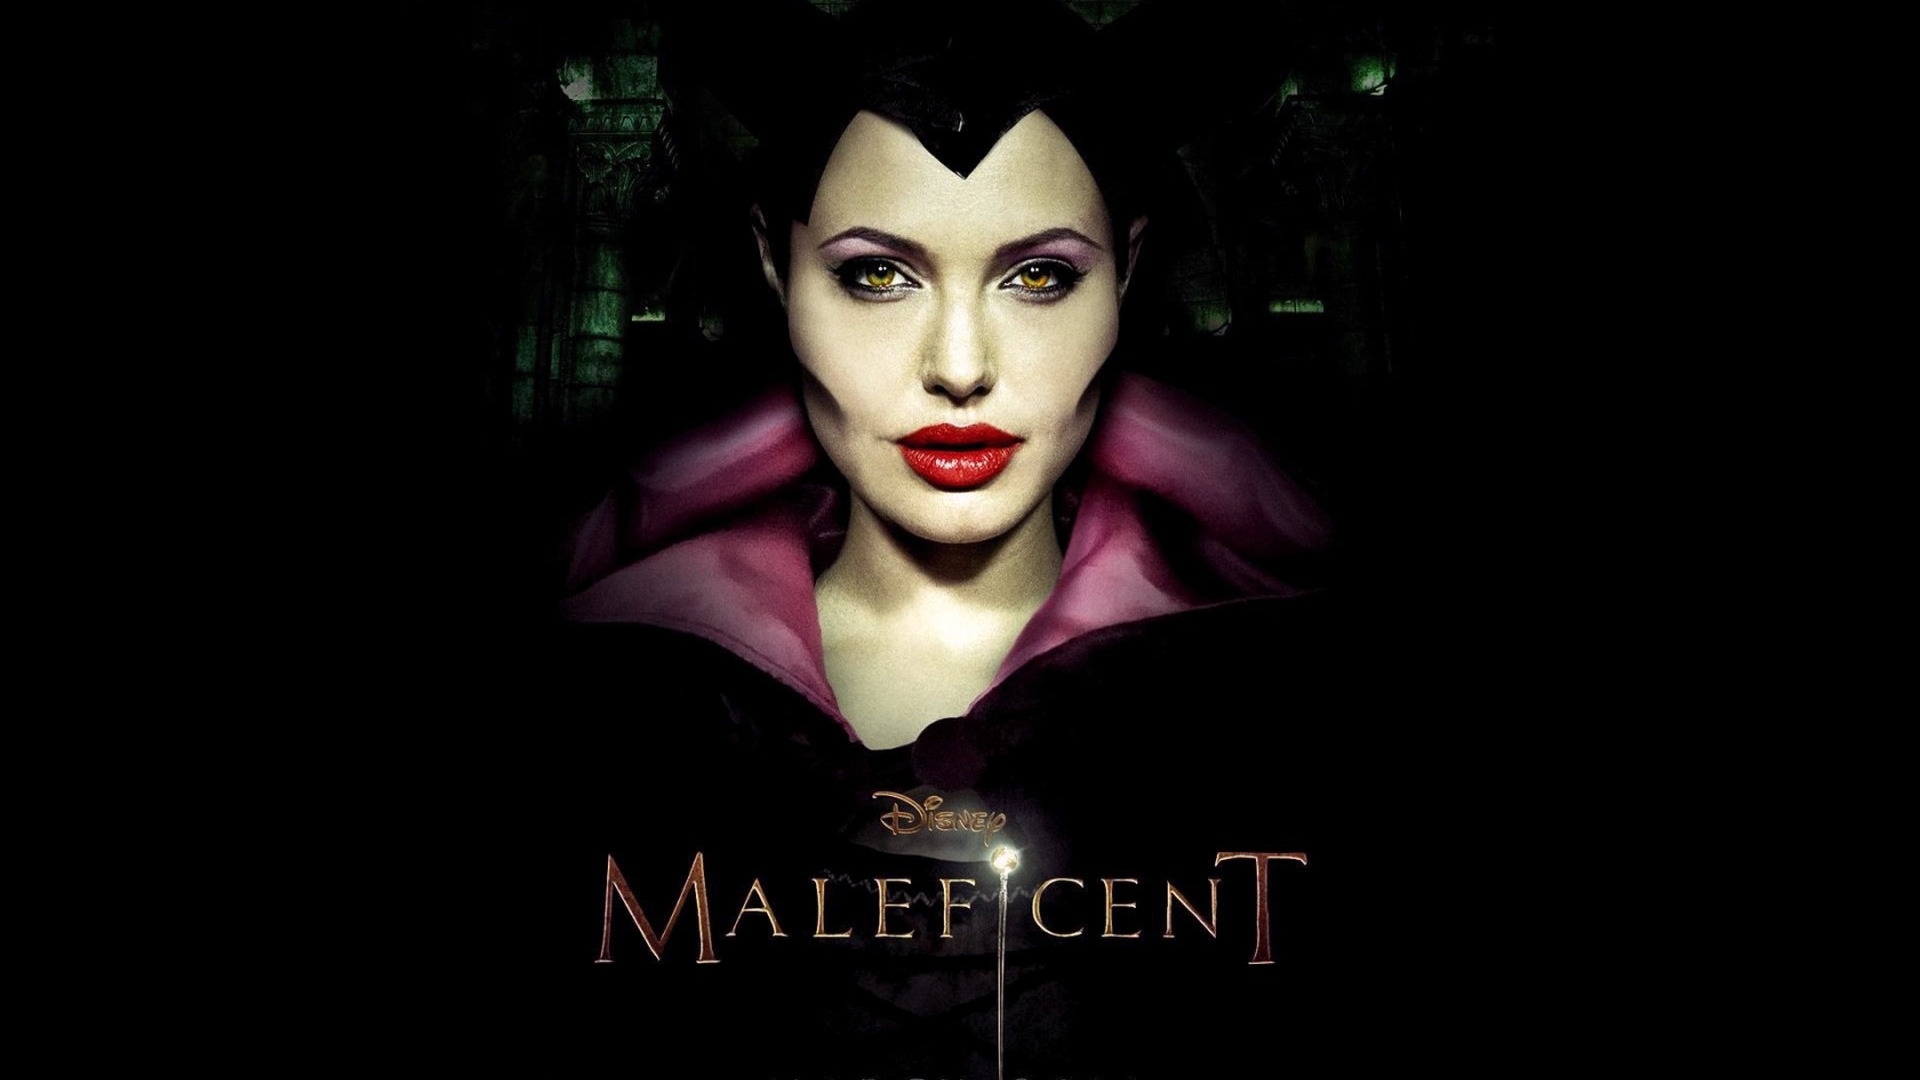 Maleficent for 1920 x 1080 HDTV 1080p resolution